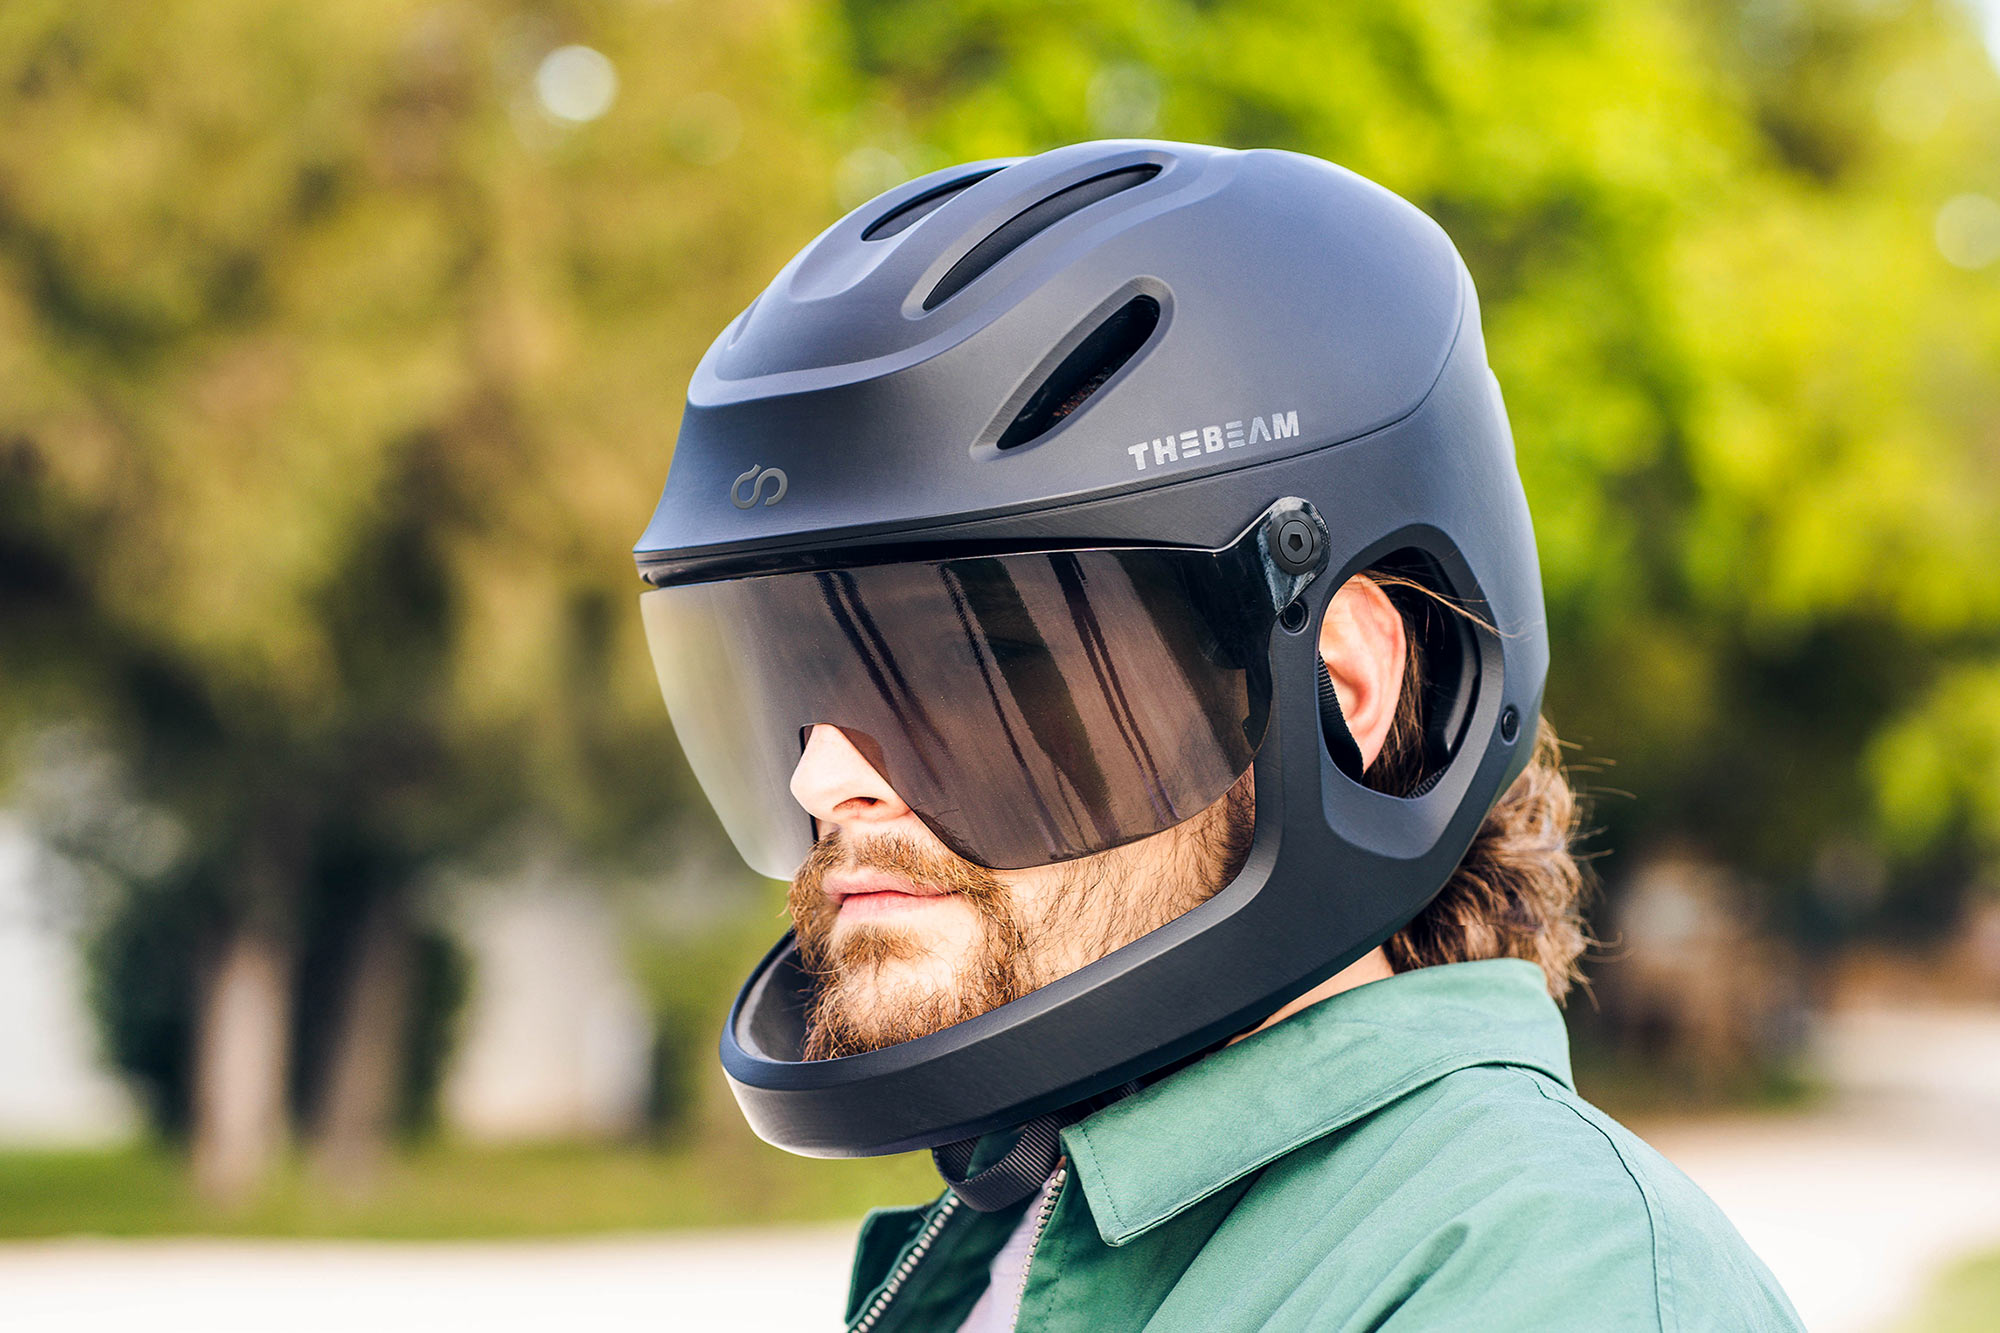 The Beam x Virgo Move Full-Face Helmet Brings Extra Protection for Safer eBike Riding